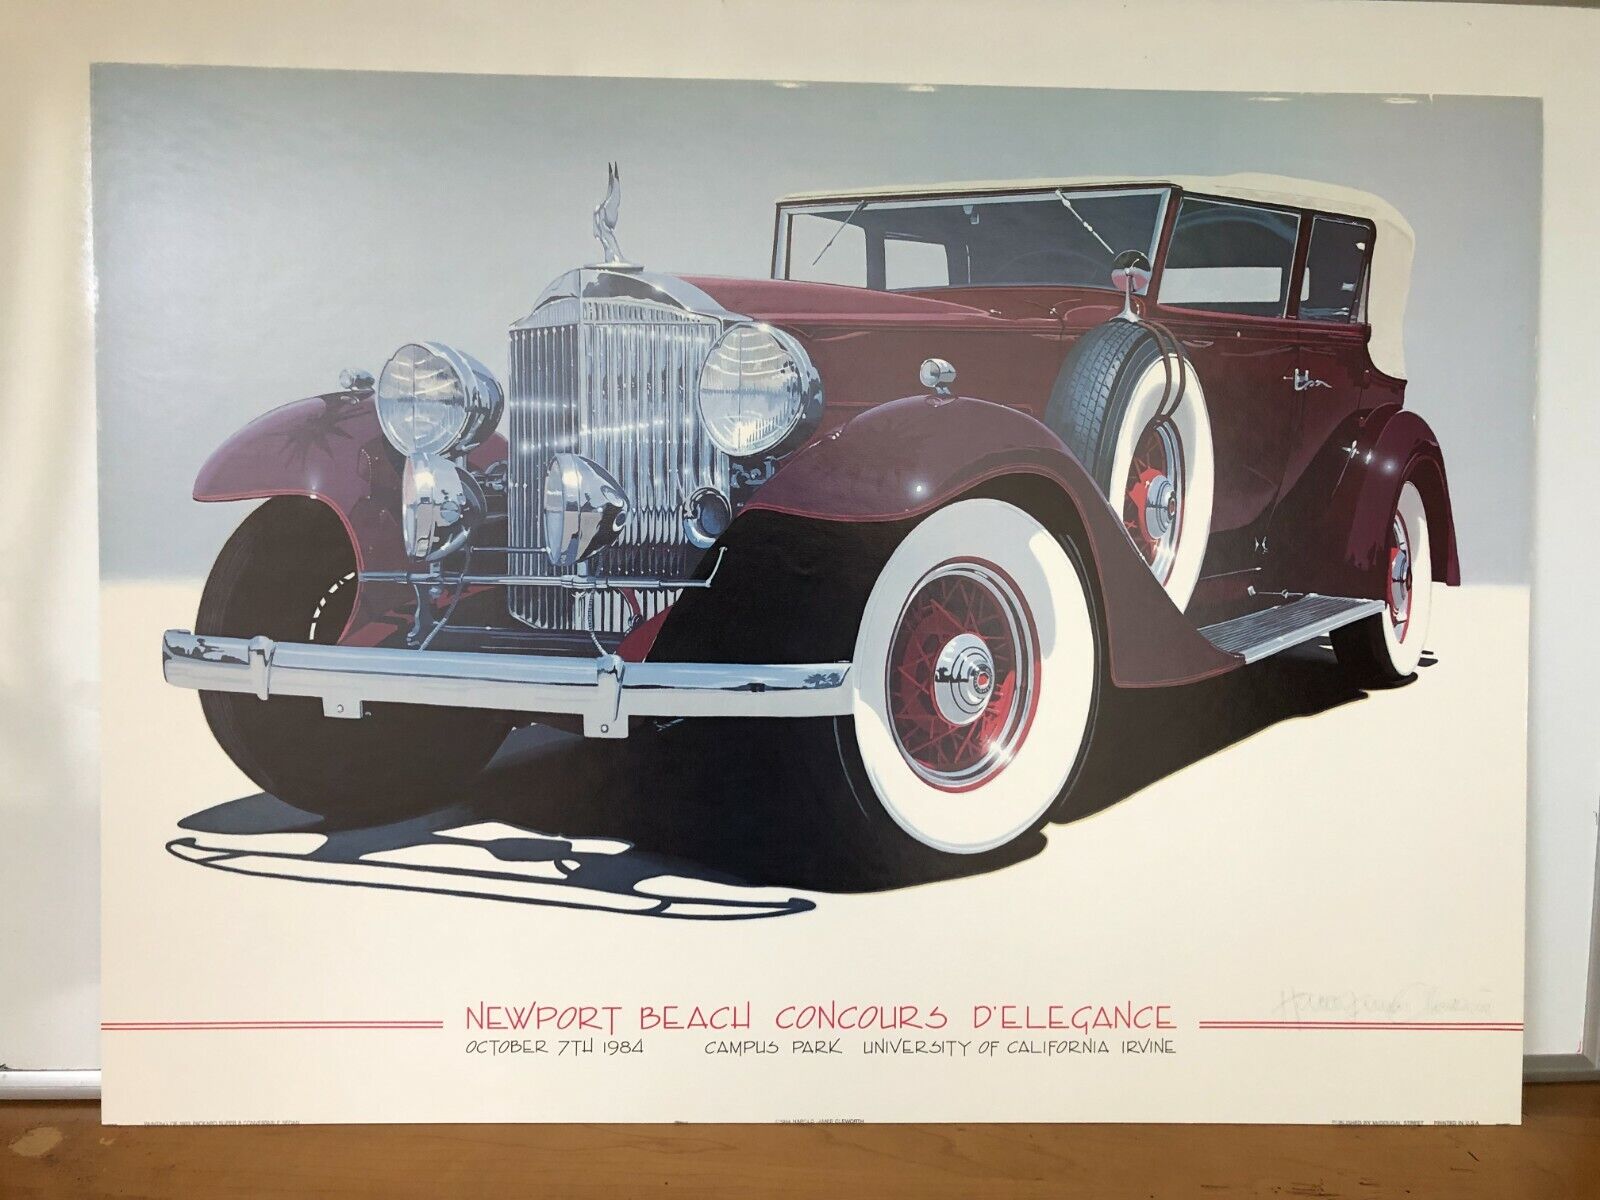 198 Newport Beach Concours D'Elegance Hand Signed Harold Cleworth Rolls Royce